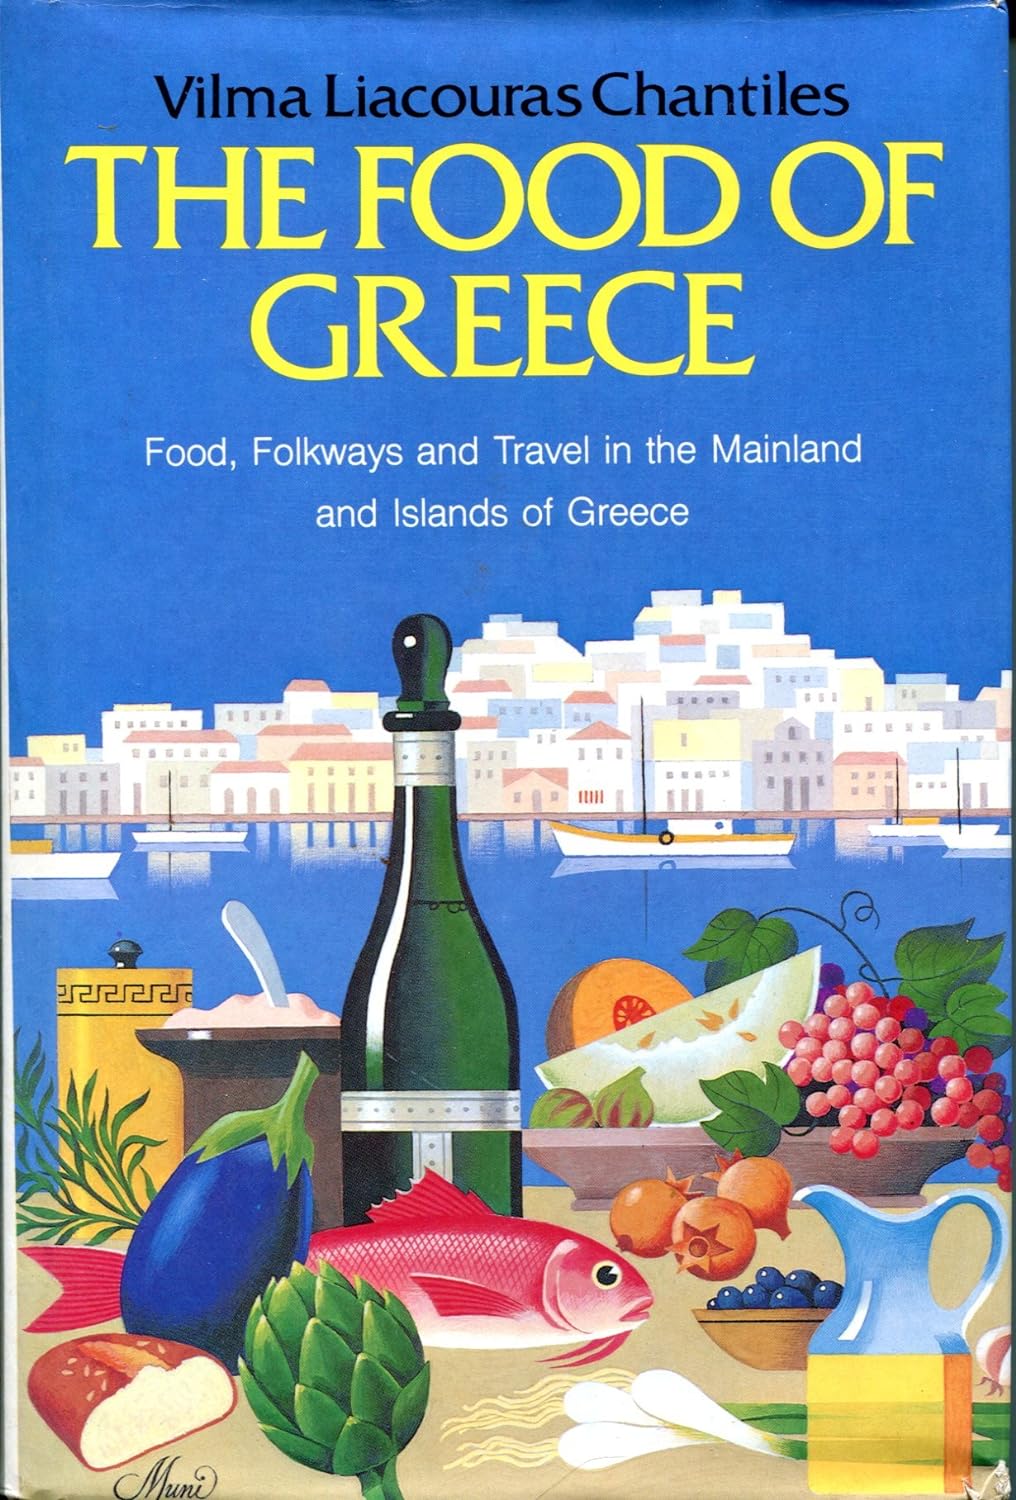 Food of Greece Cooking  Folkways and Travel in the Mainland and Islands of Greece by Vilma Chantiles